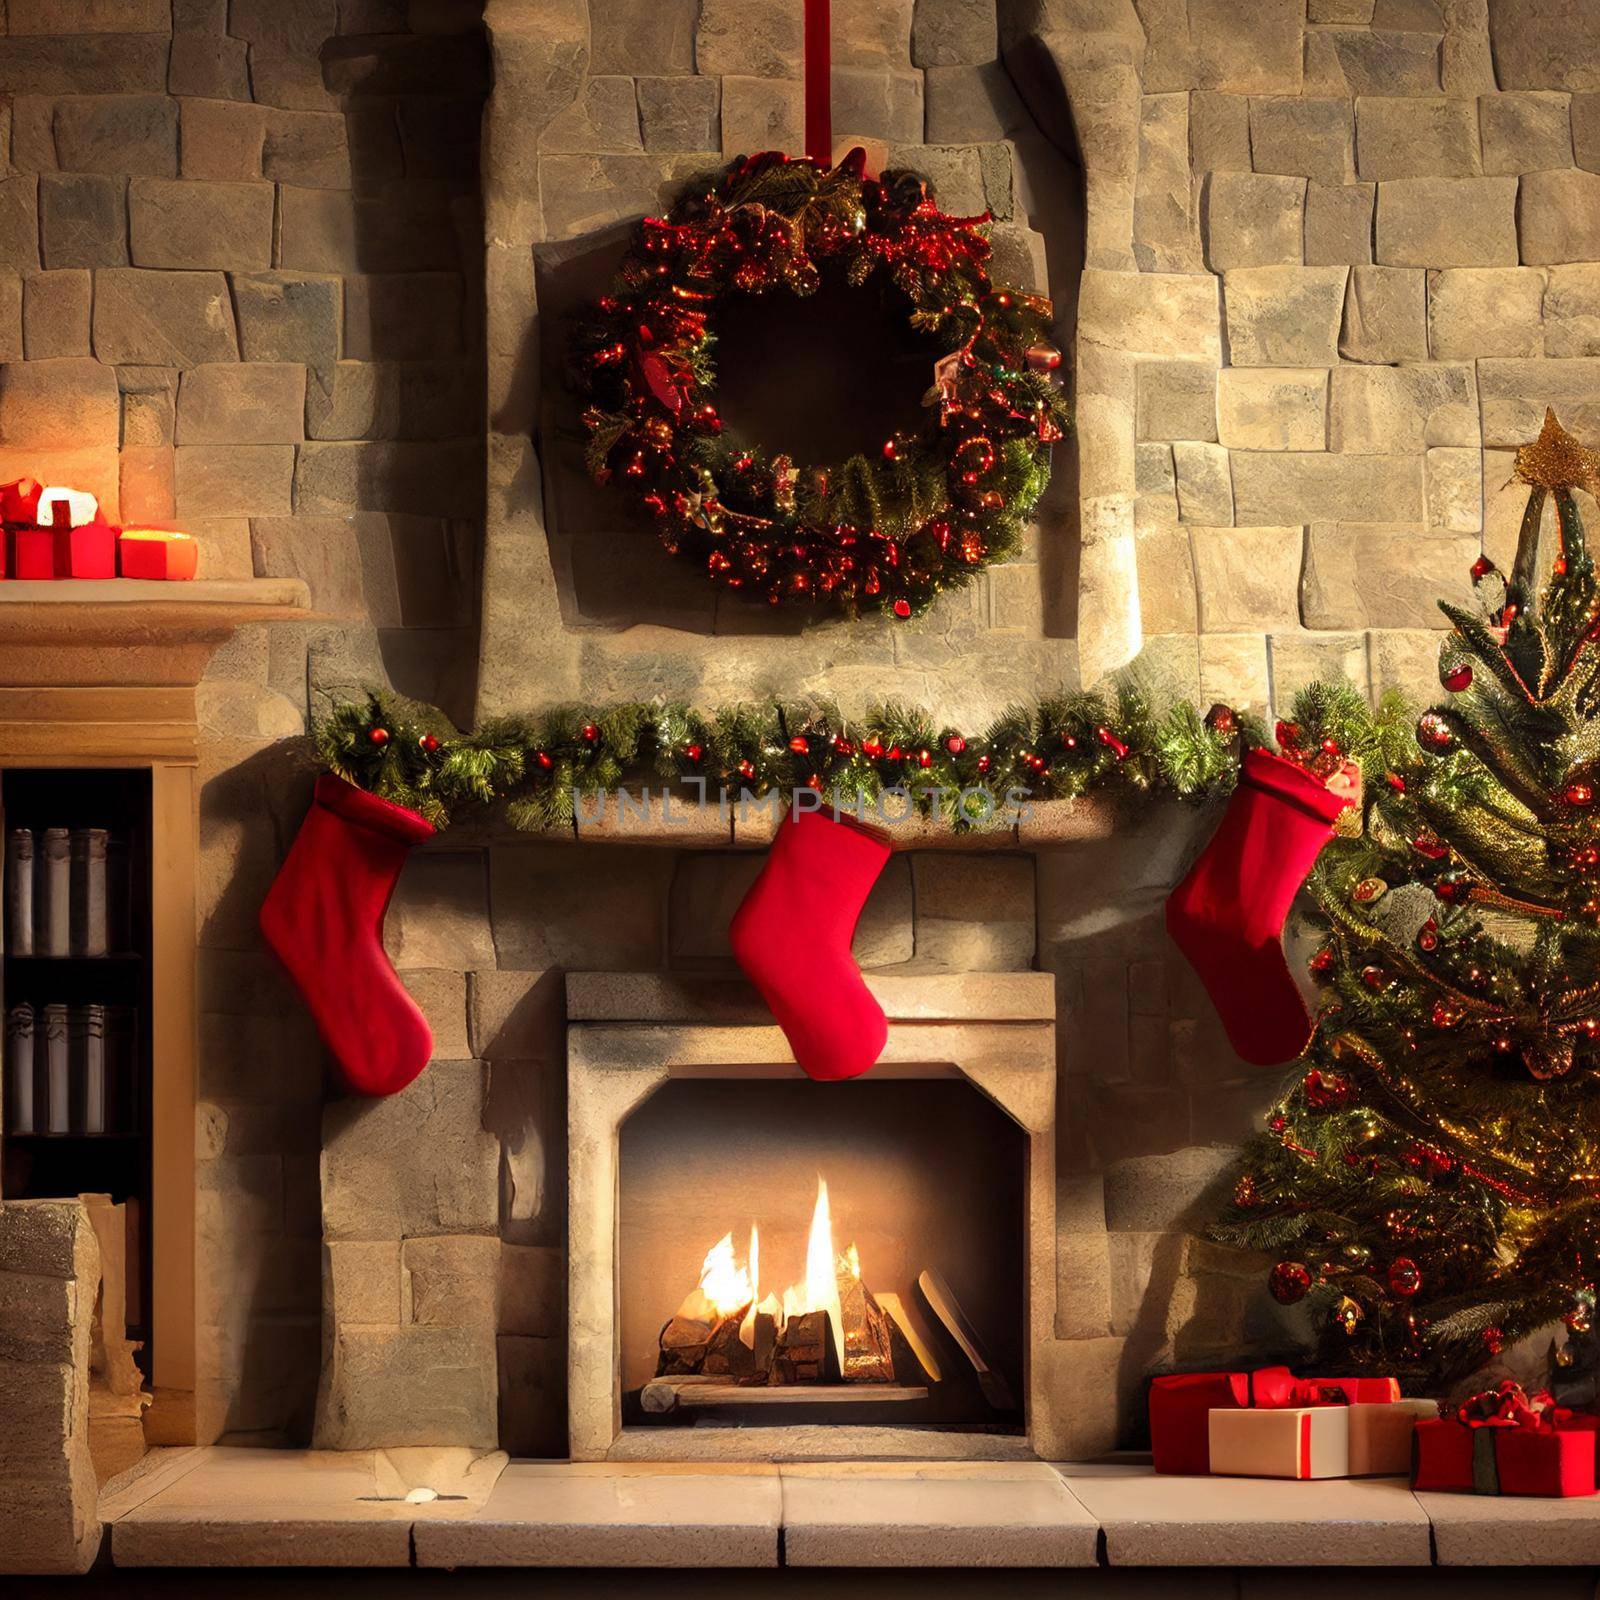 Stone fireplace decorated for Christmas. High quality illustration